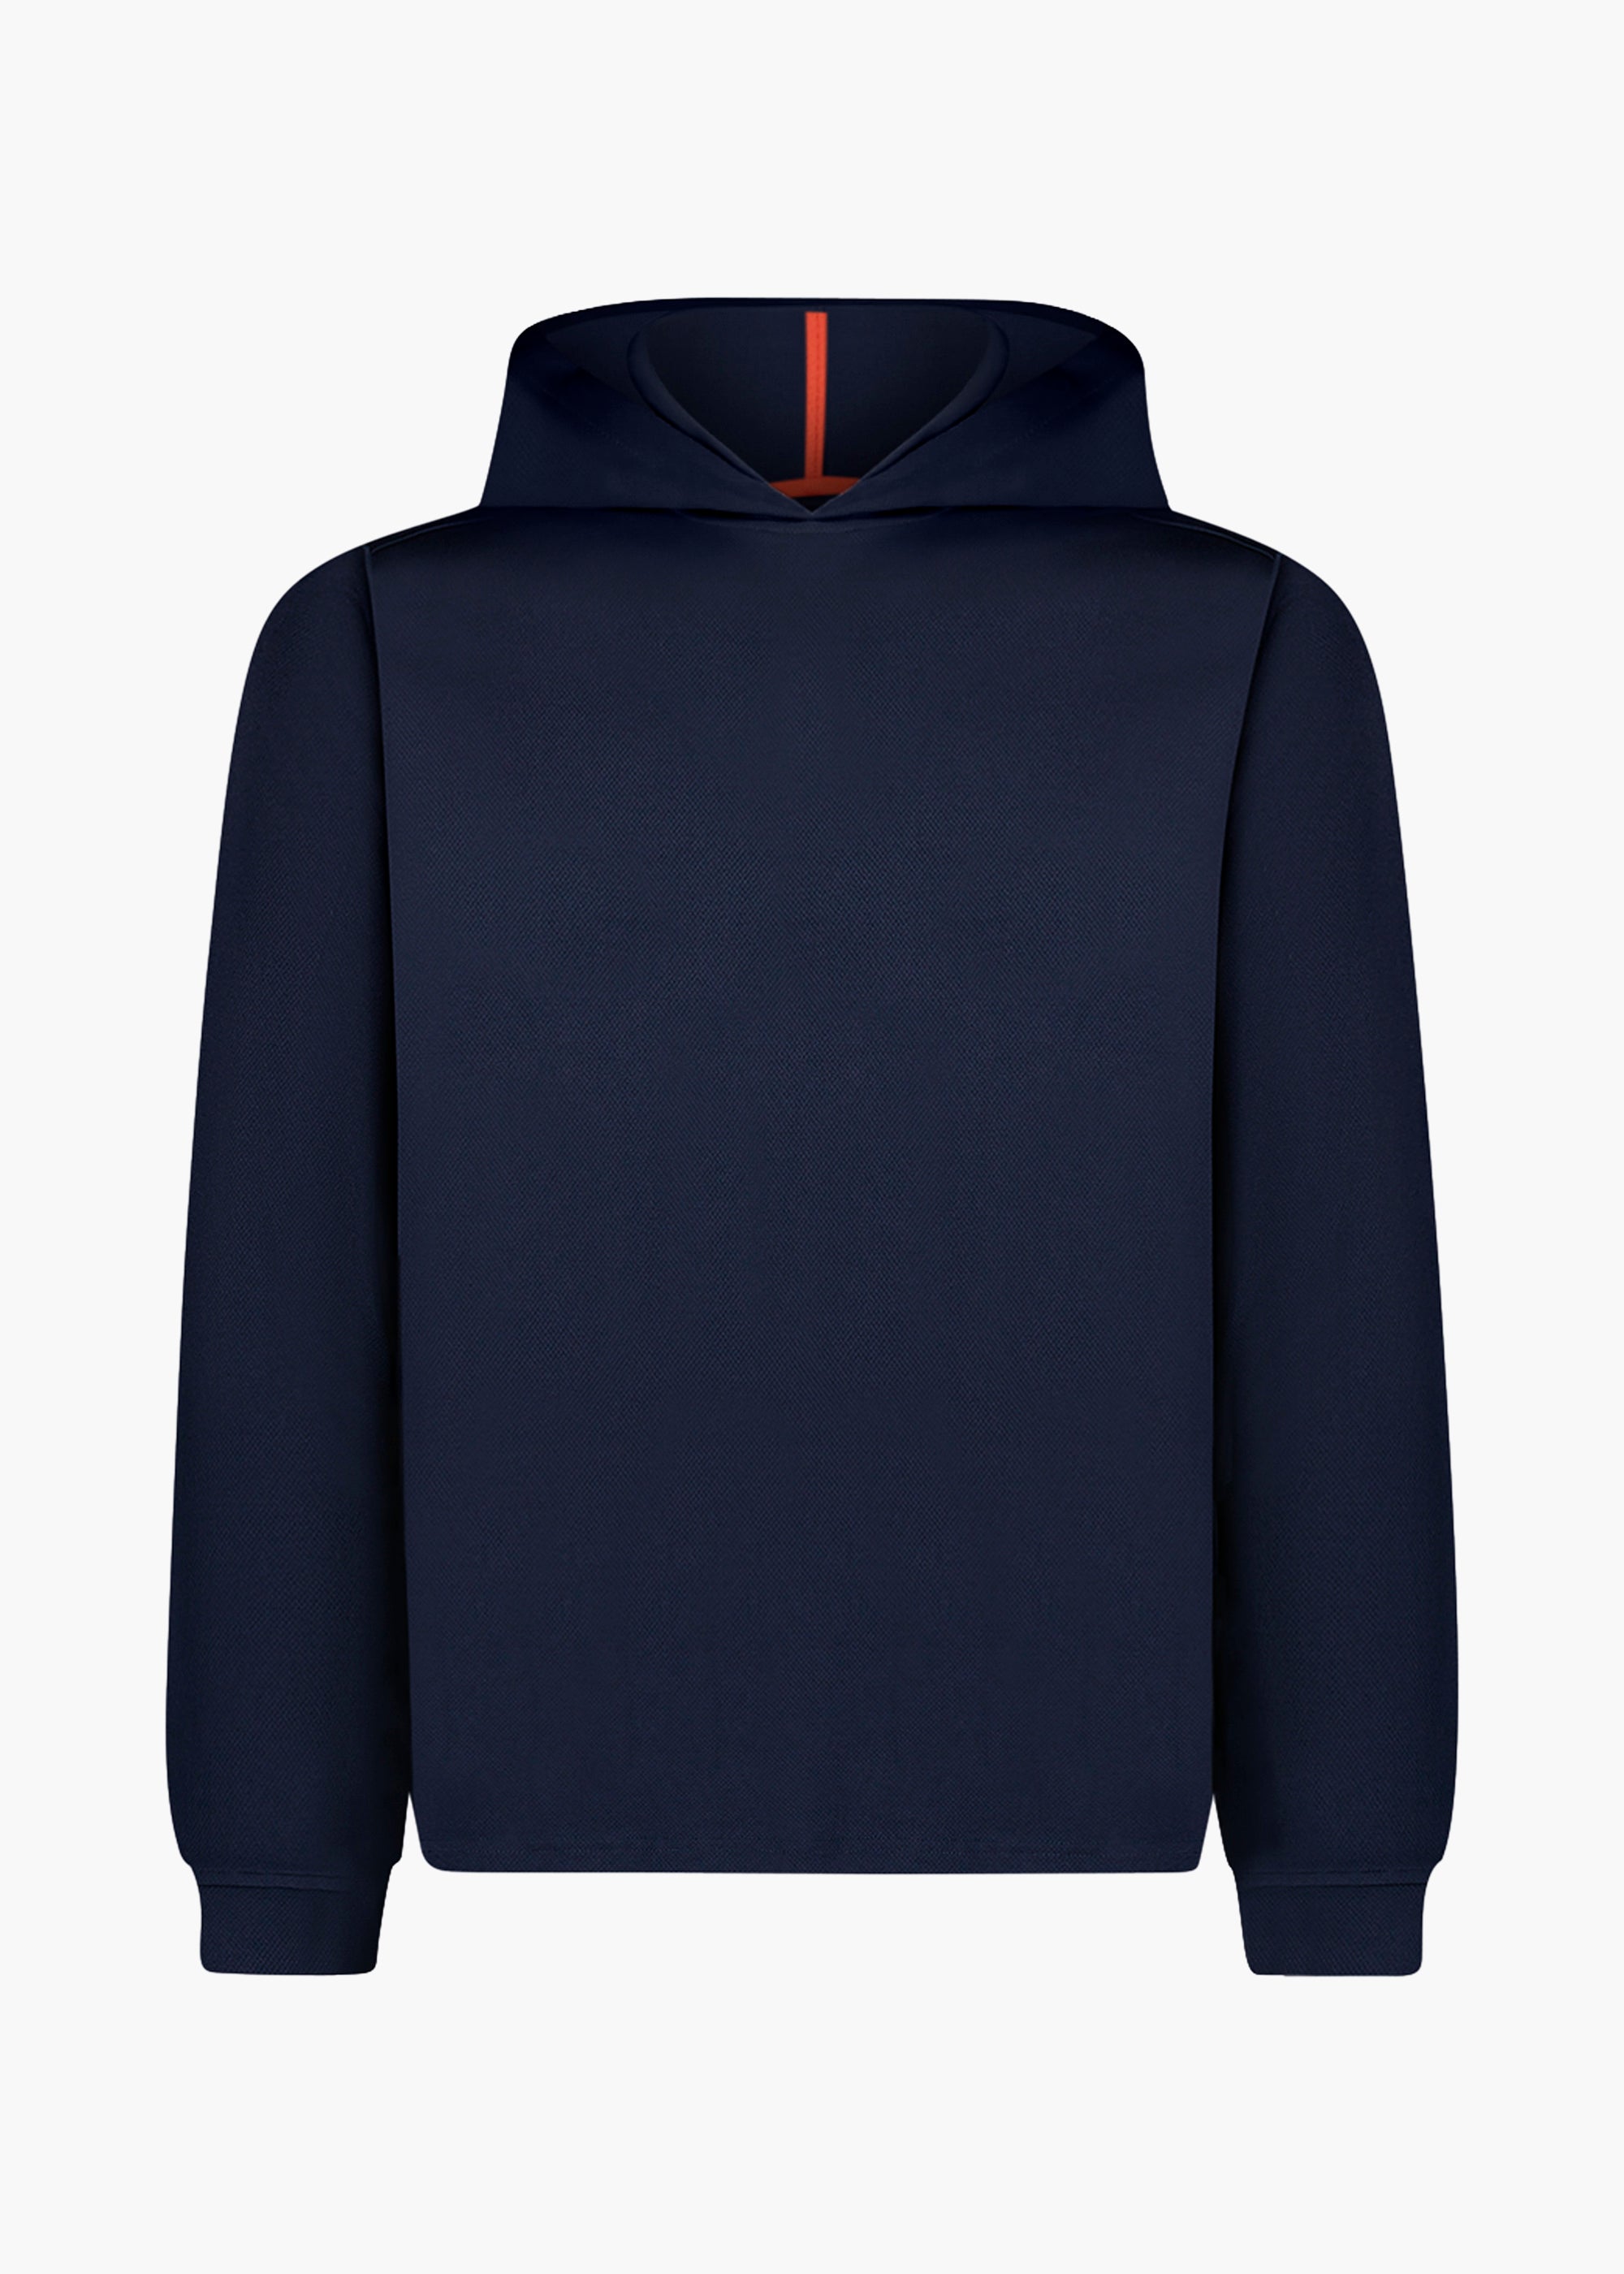 Sole Hoodie - background::white,variant::Navy